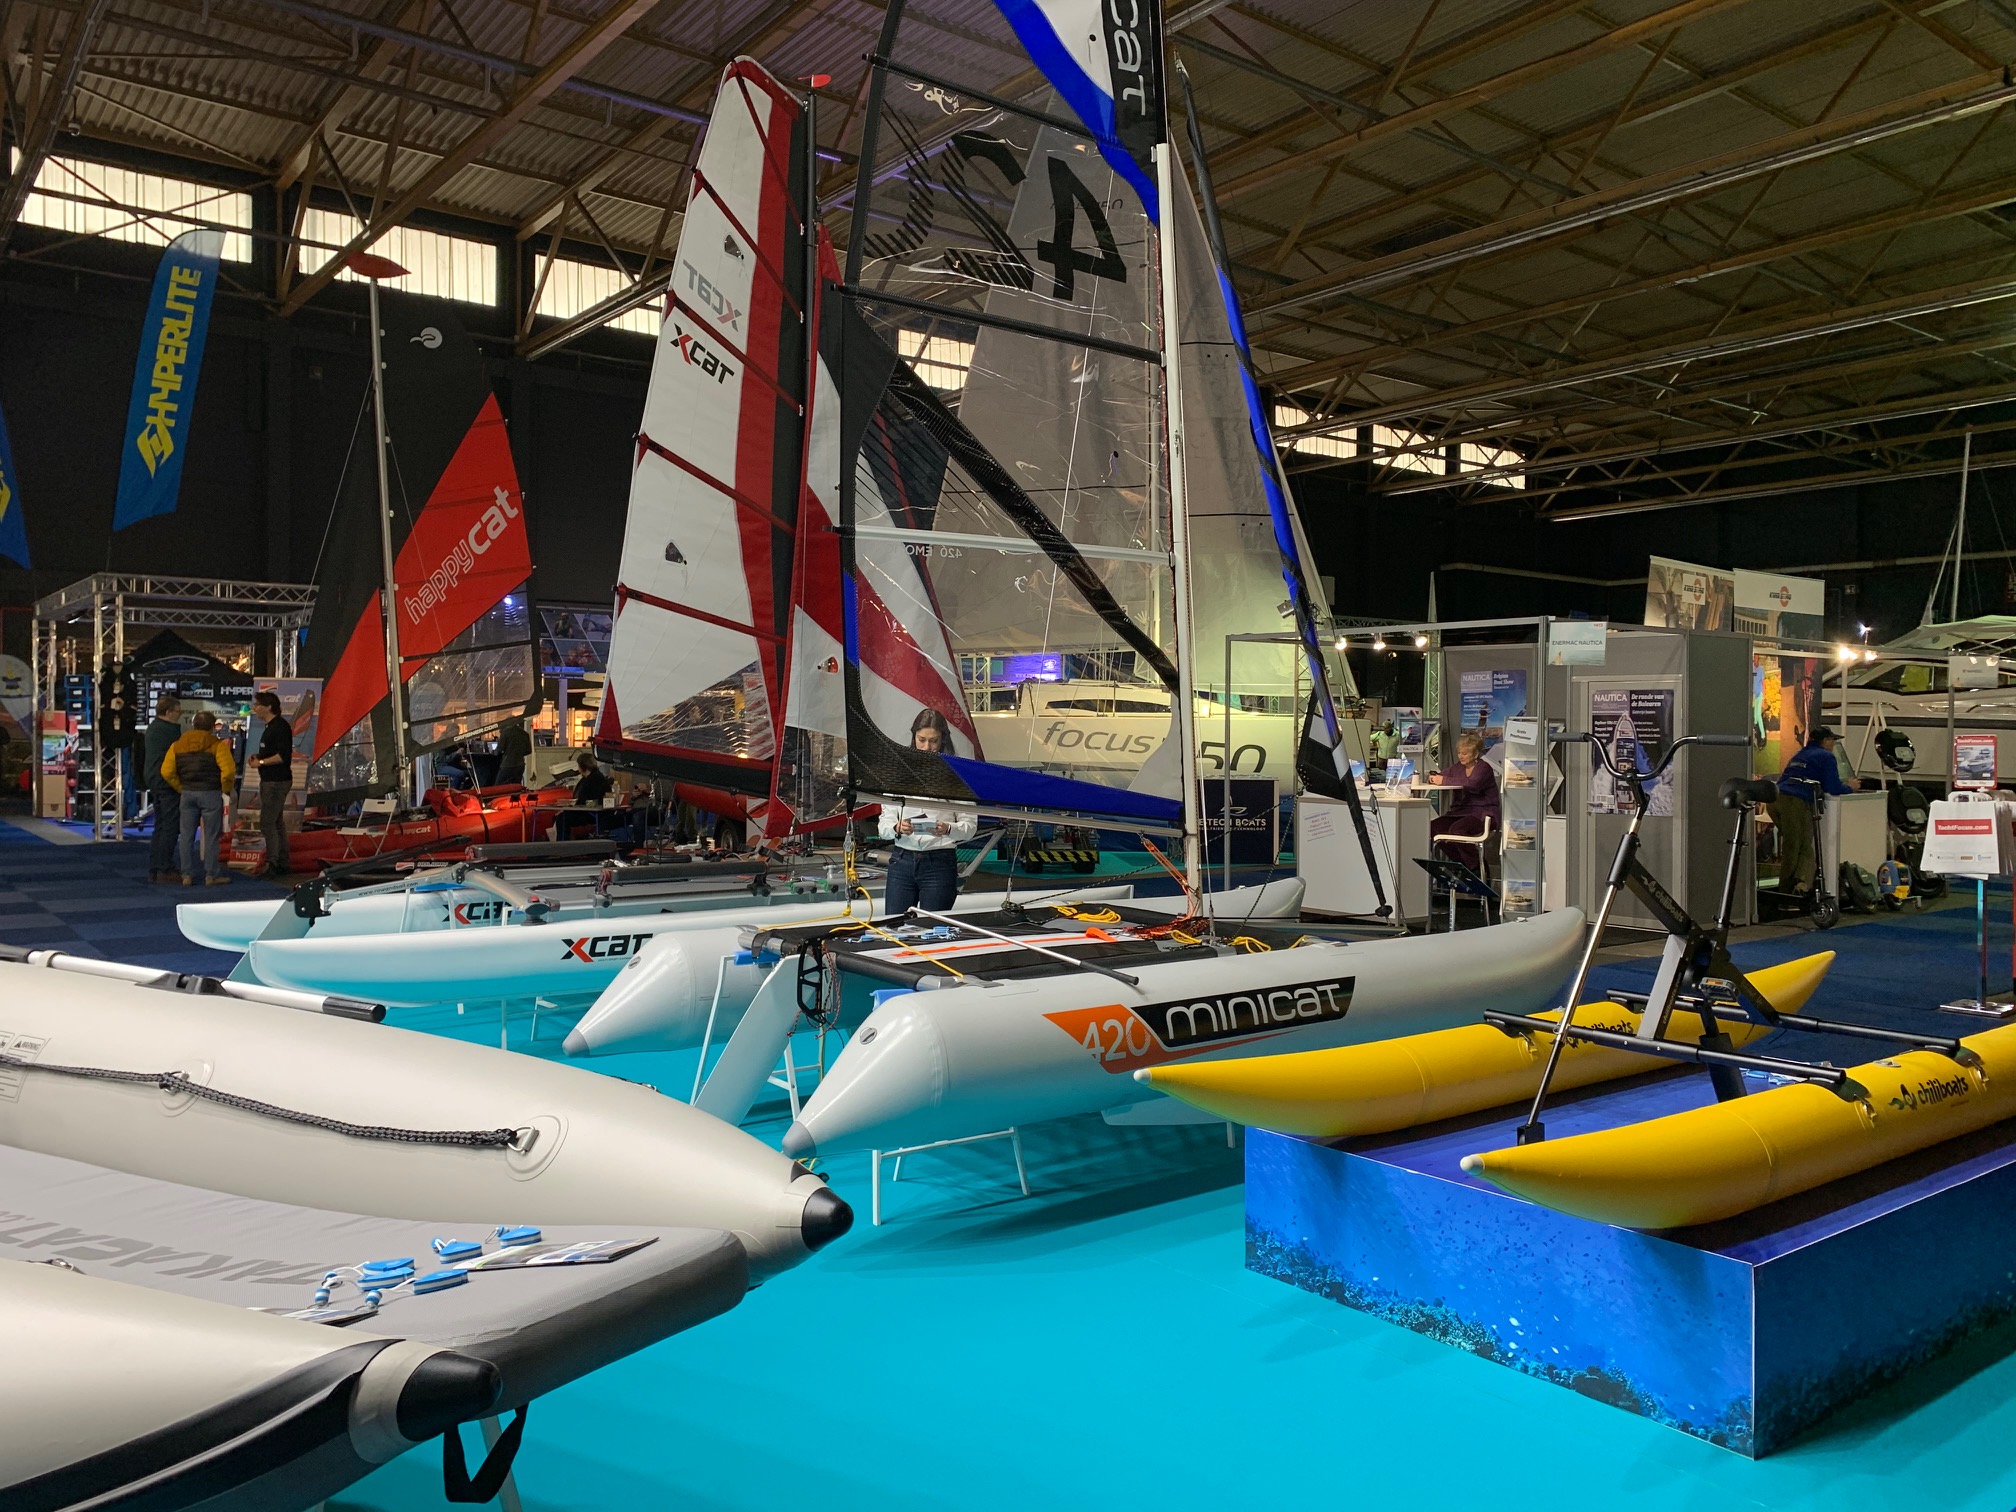 Chiliboats Waterbikes at Belgian Boat Show